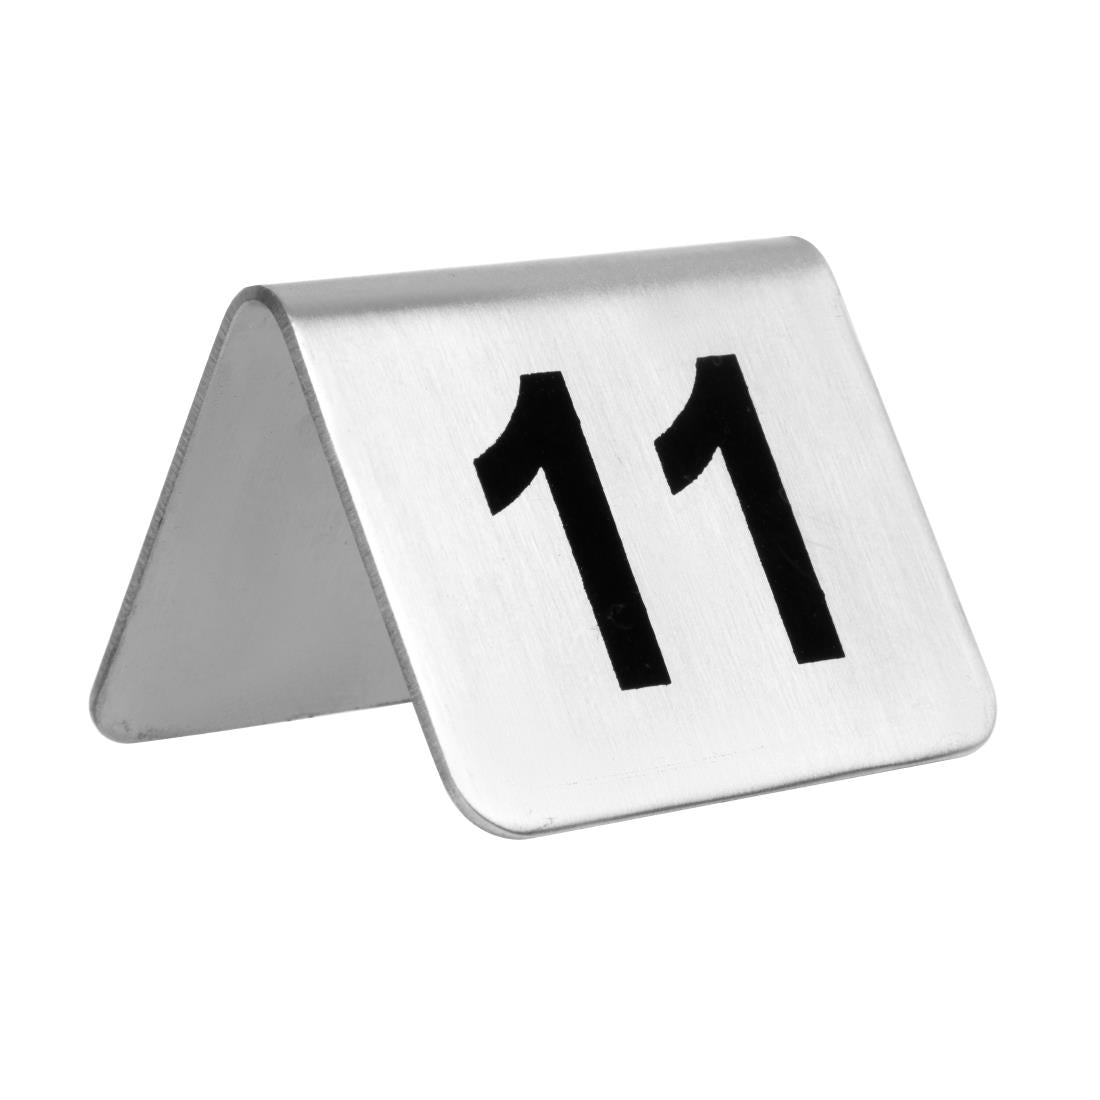 Table Numbers Set St/St - 11-20